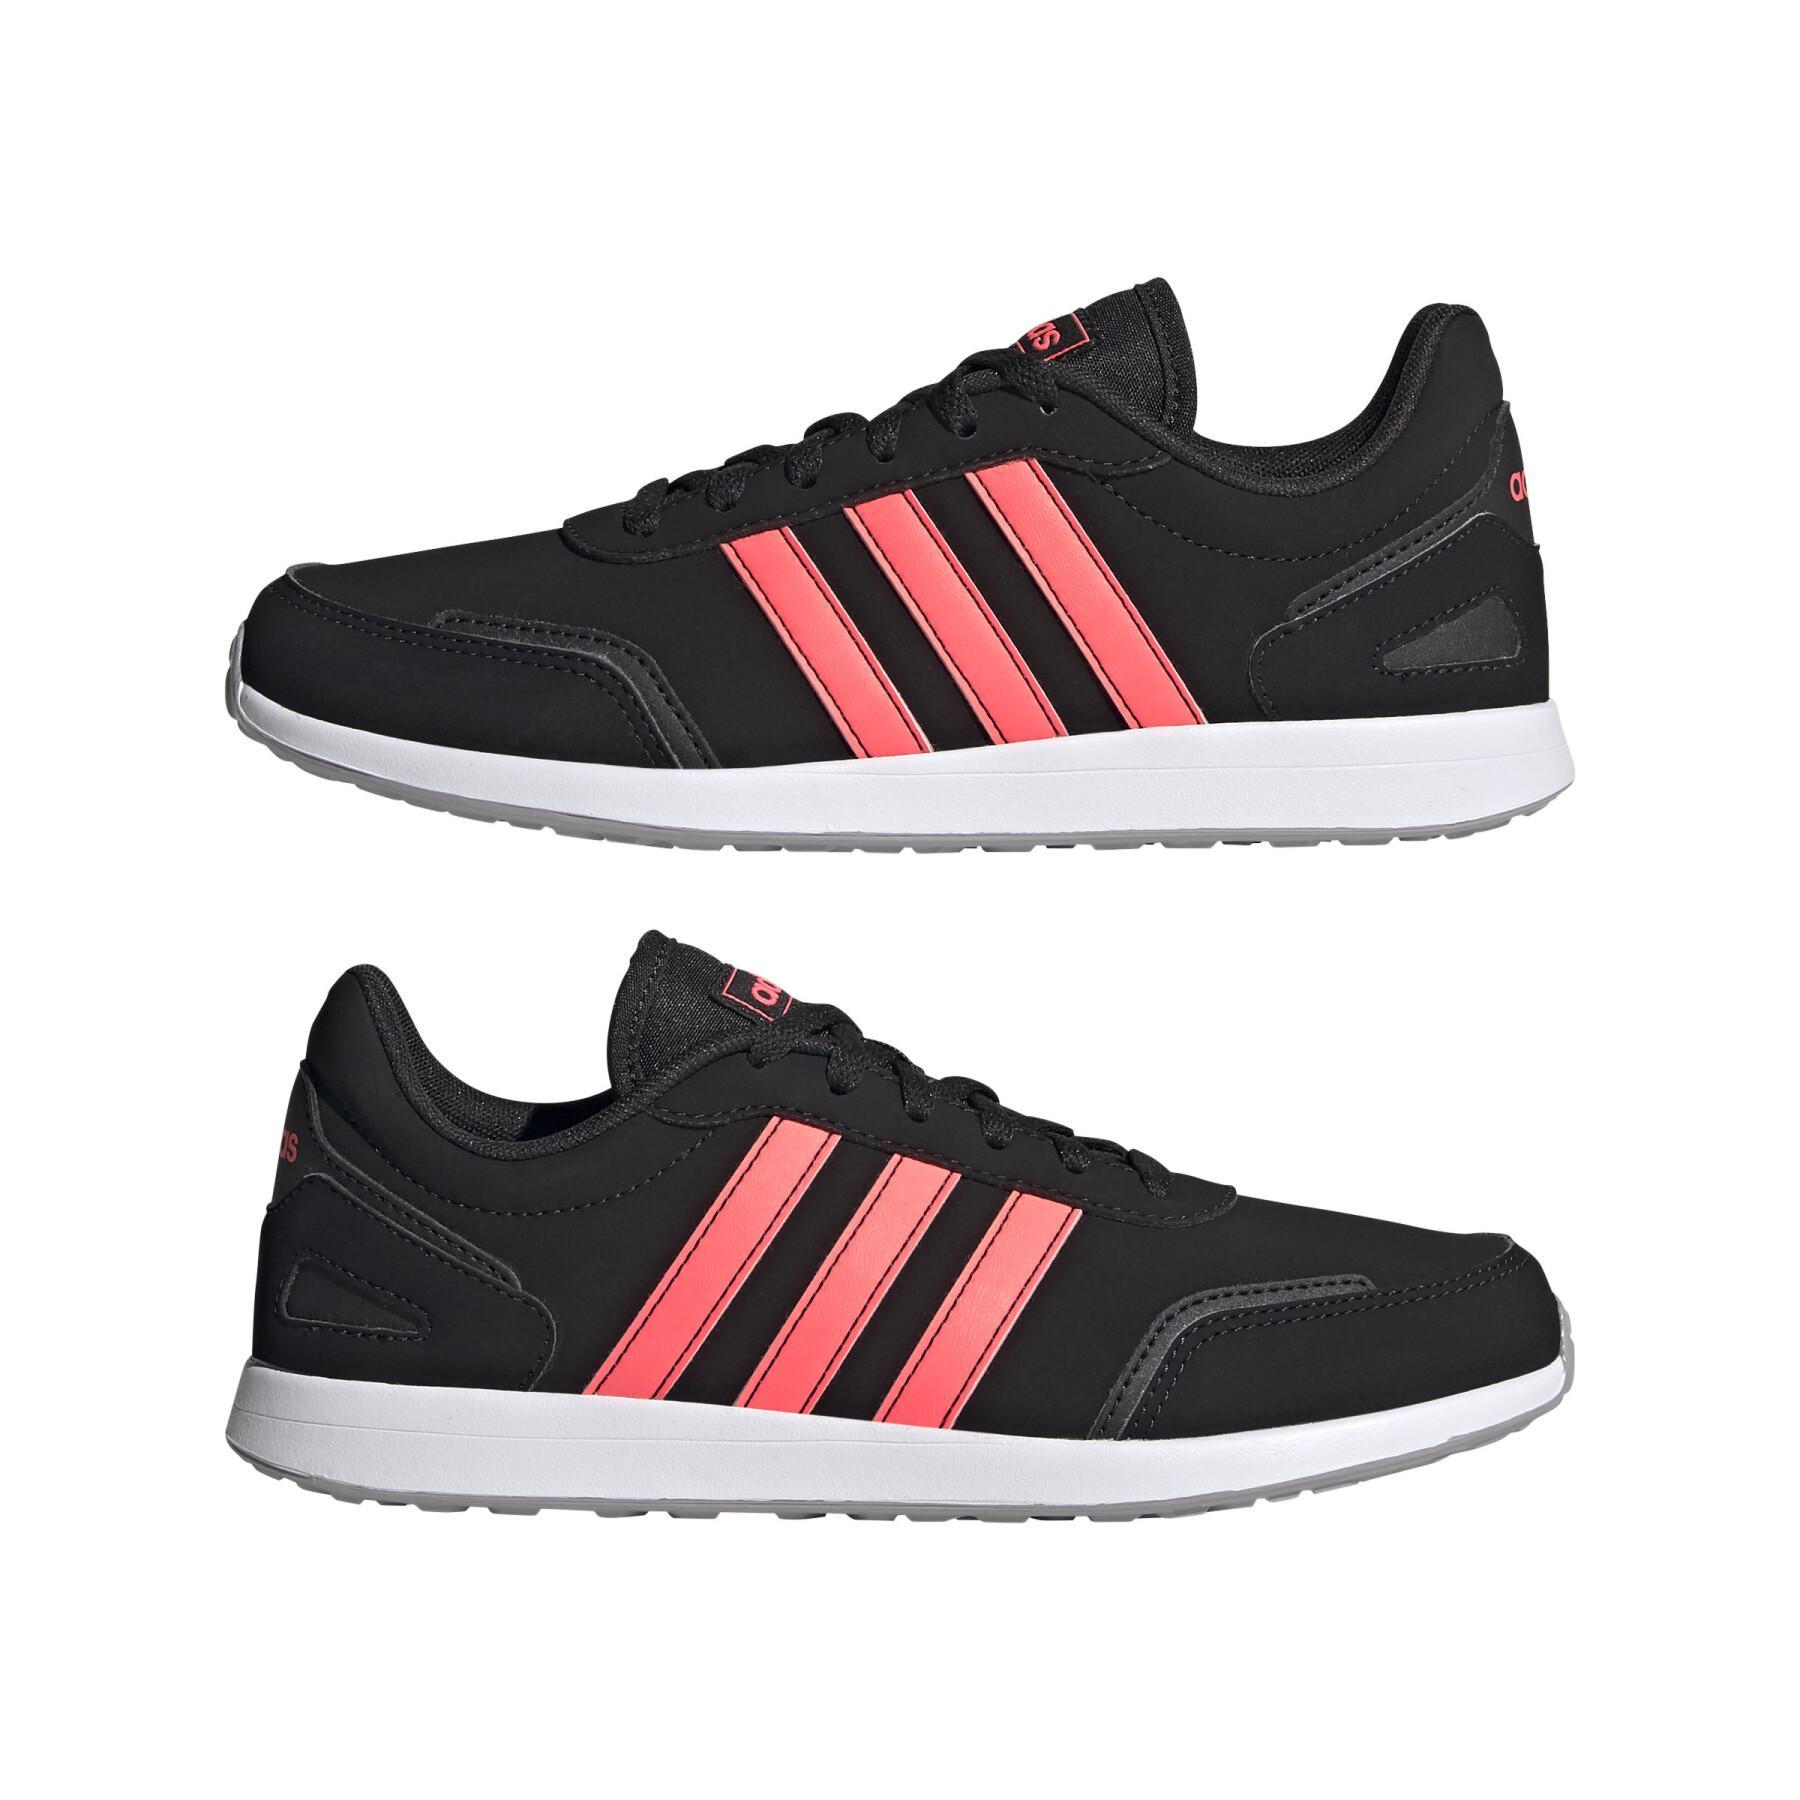 Girl sneakers adidas Vs Switch 3